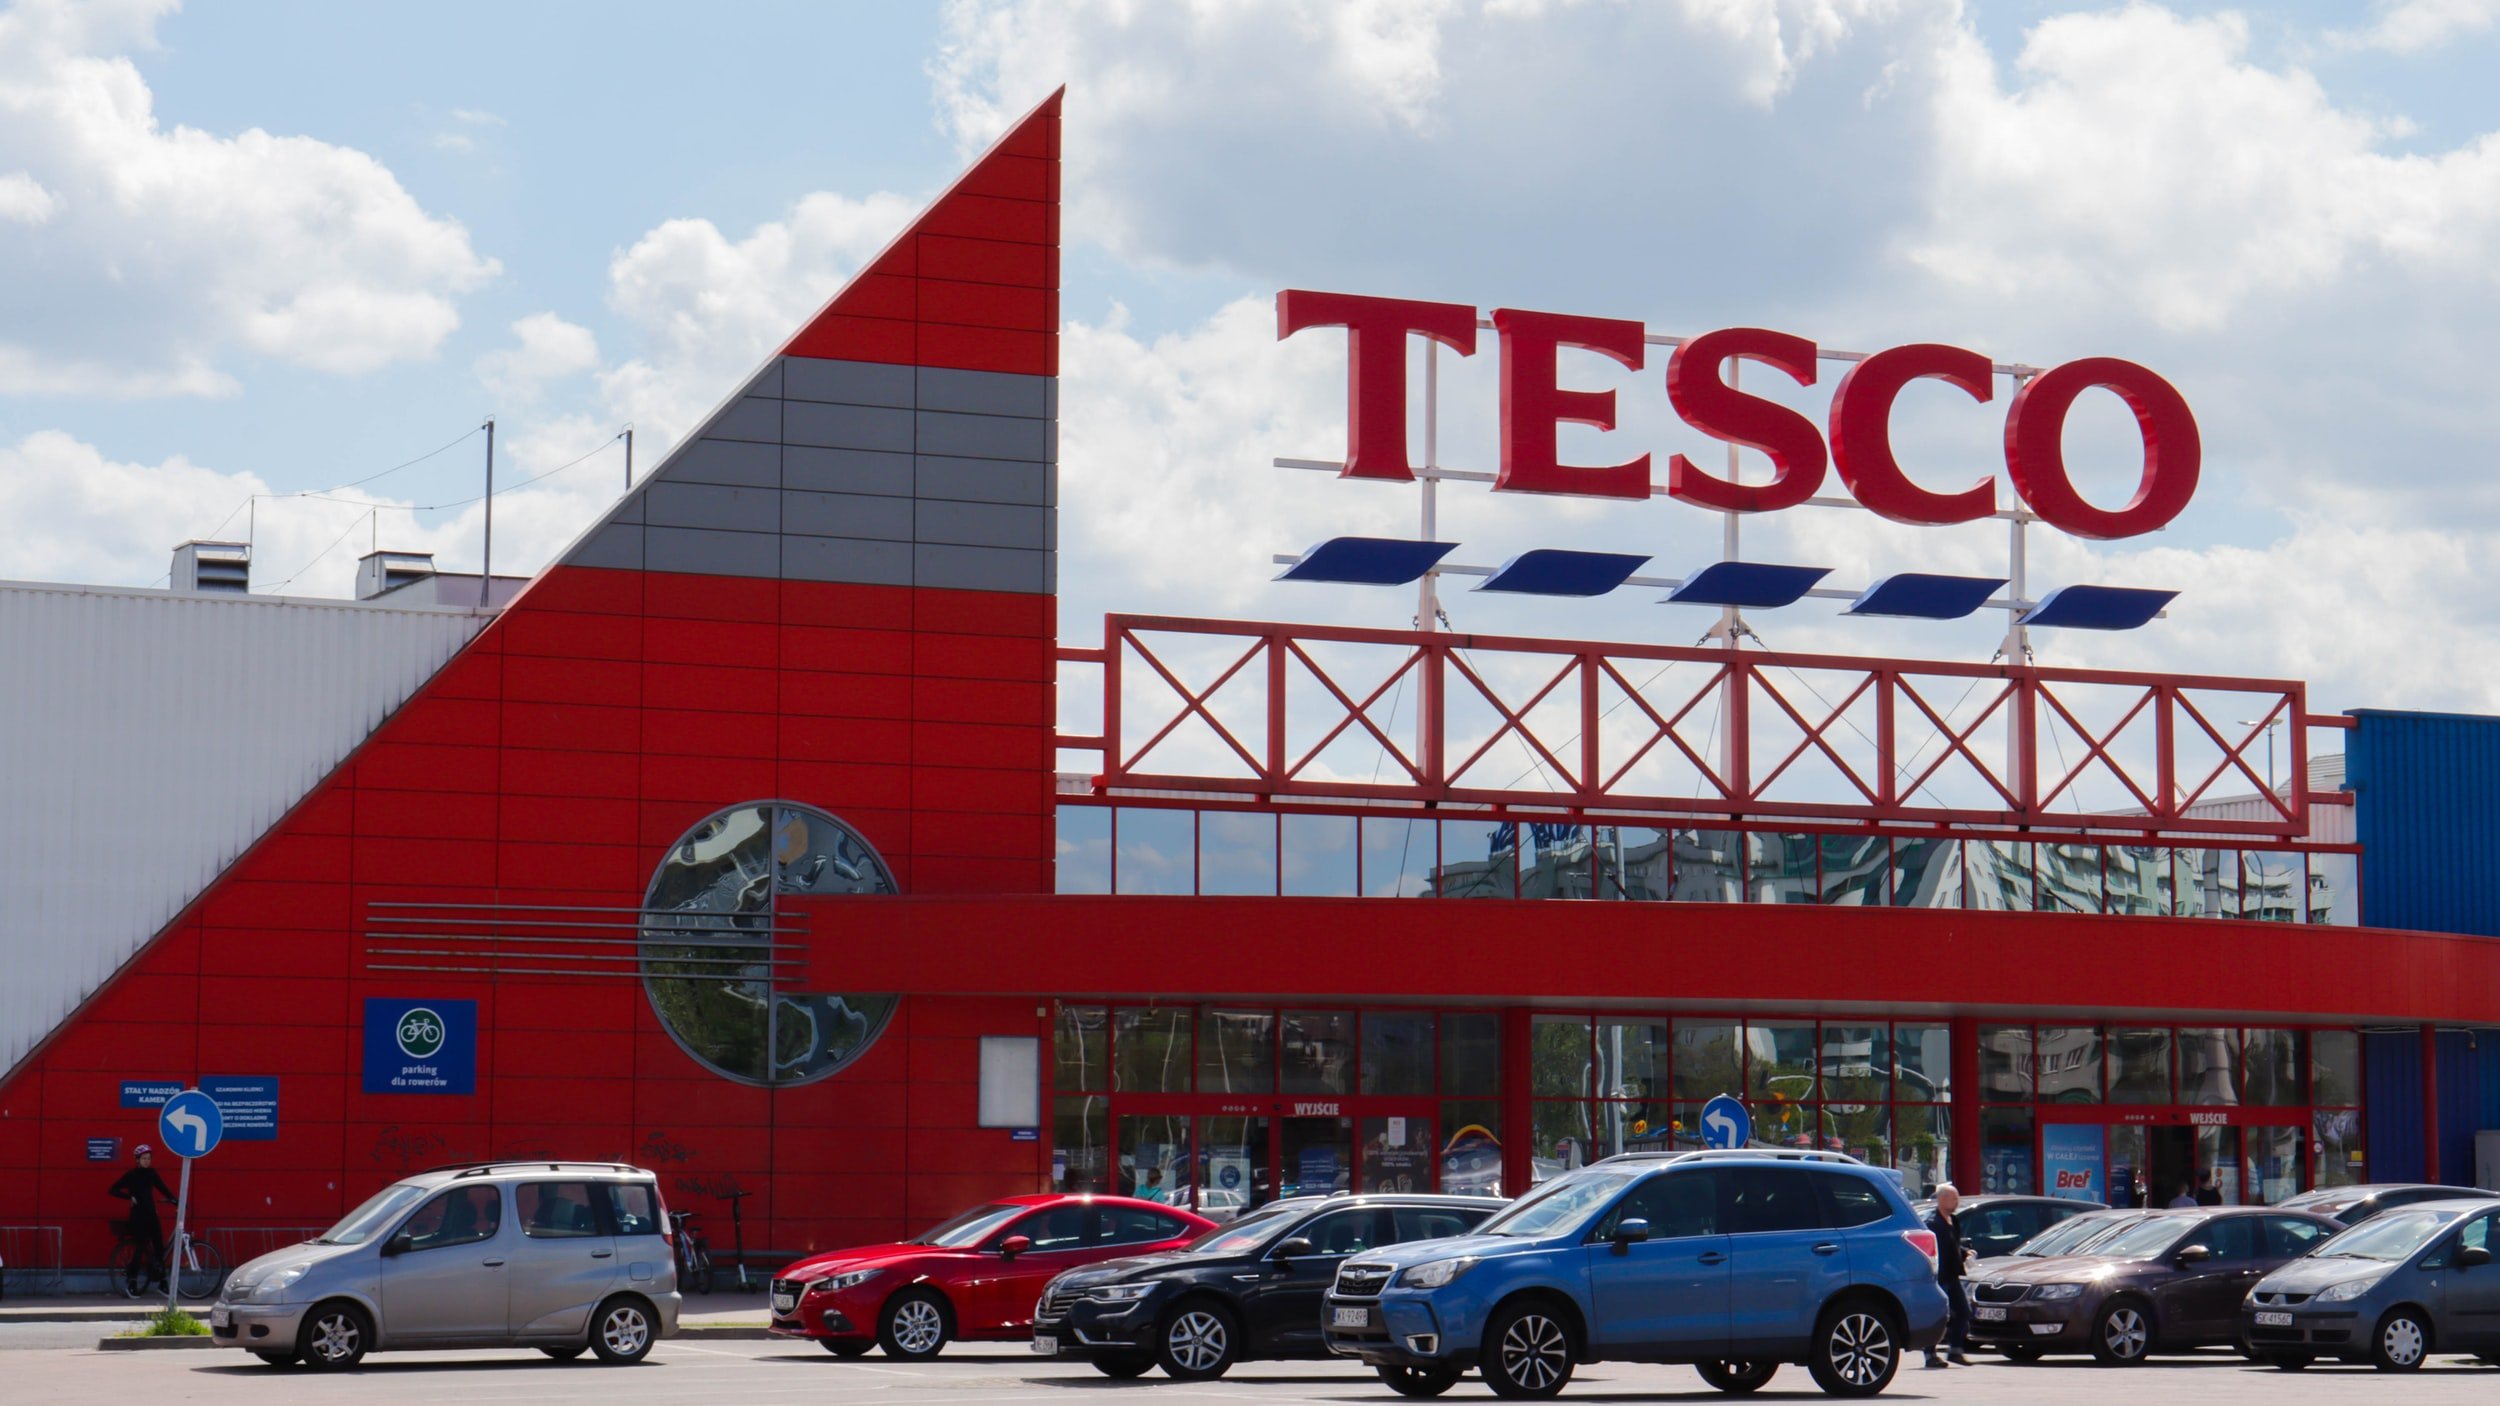 Tesco Fake Meat Advertisement Ruled Unsubstantiated and "Likely to Mislead"